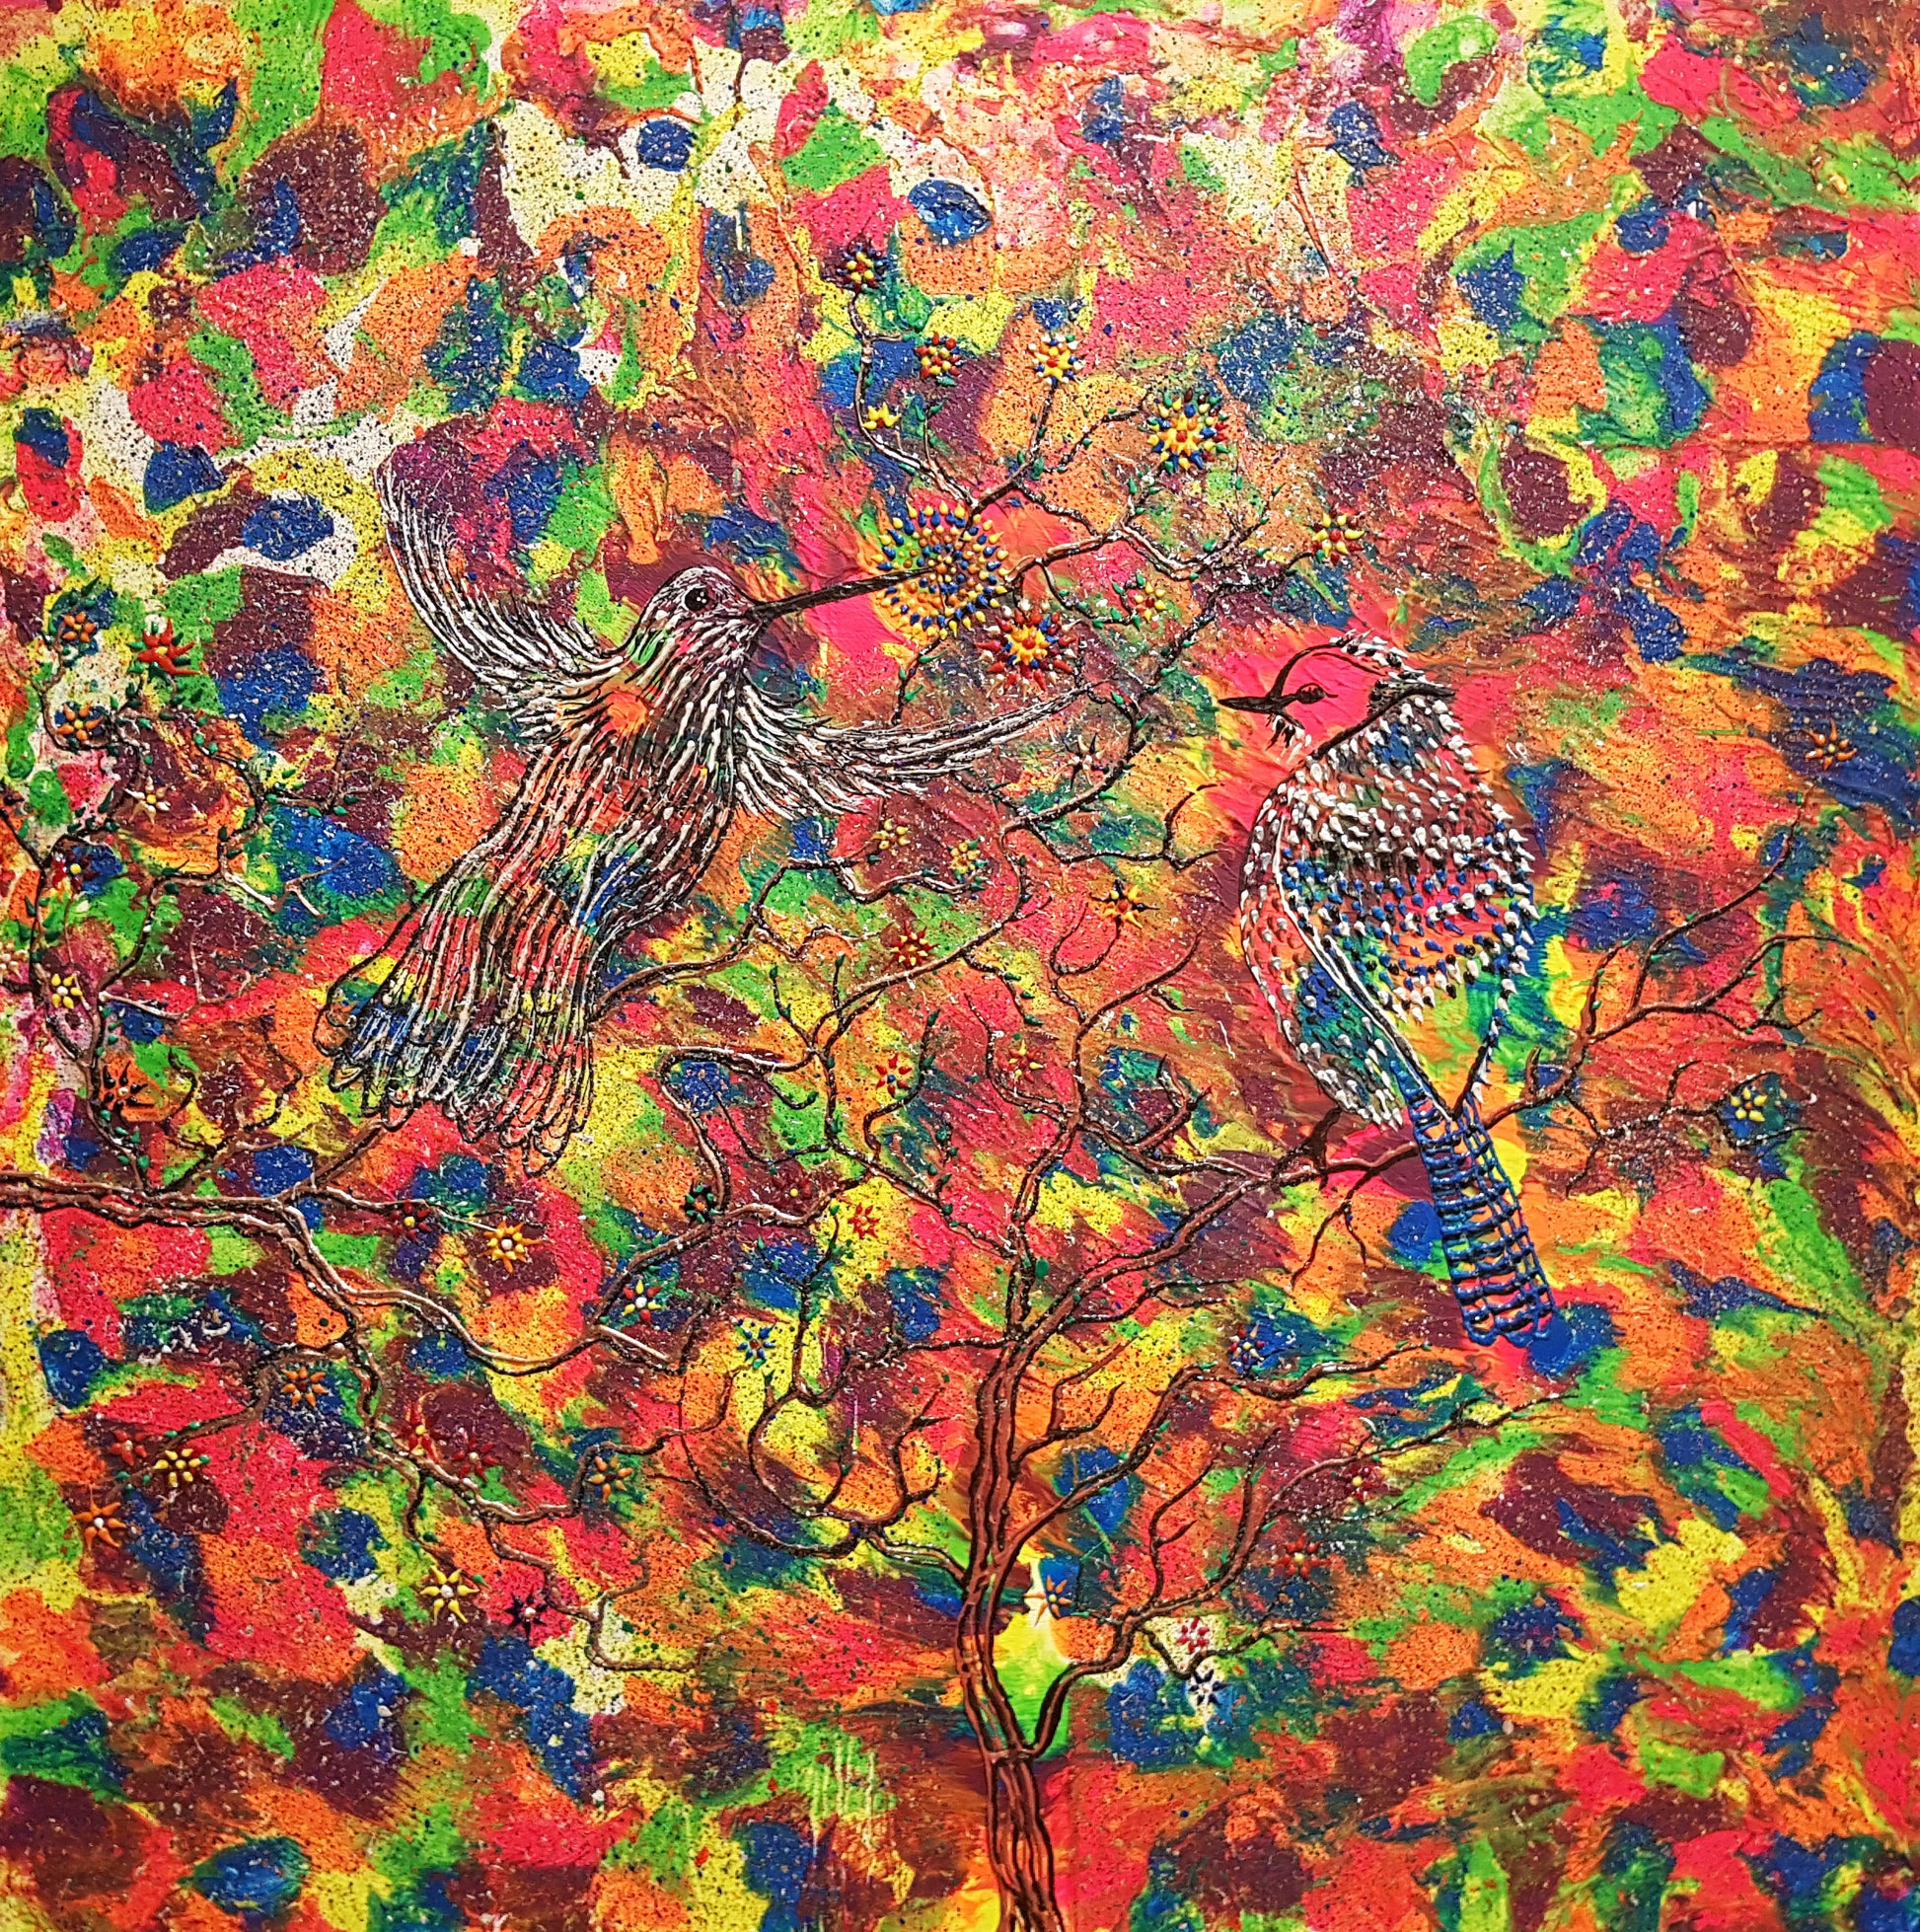 Hummingbird and Blue Jay by Alexandra-Romano-Art-Original-Abstract-Artwork Painting Colorful Unique Expressive Contemporary Gallery